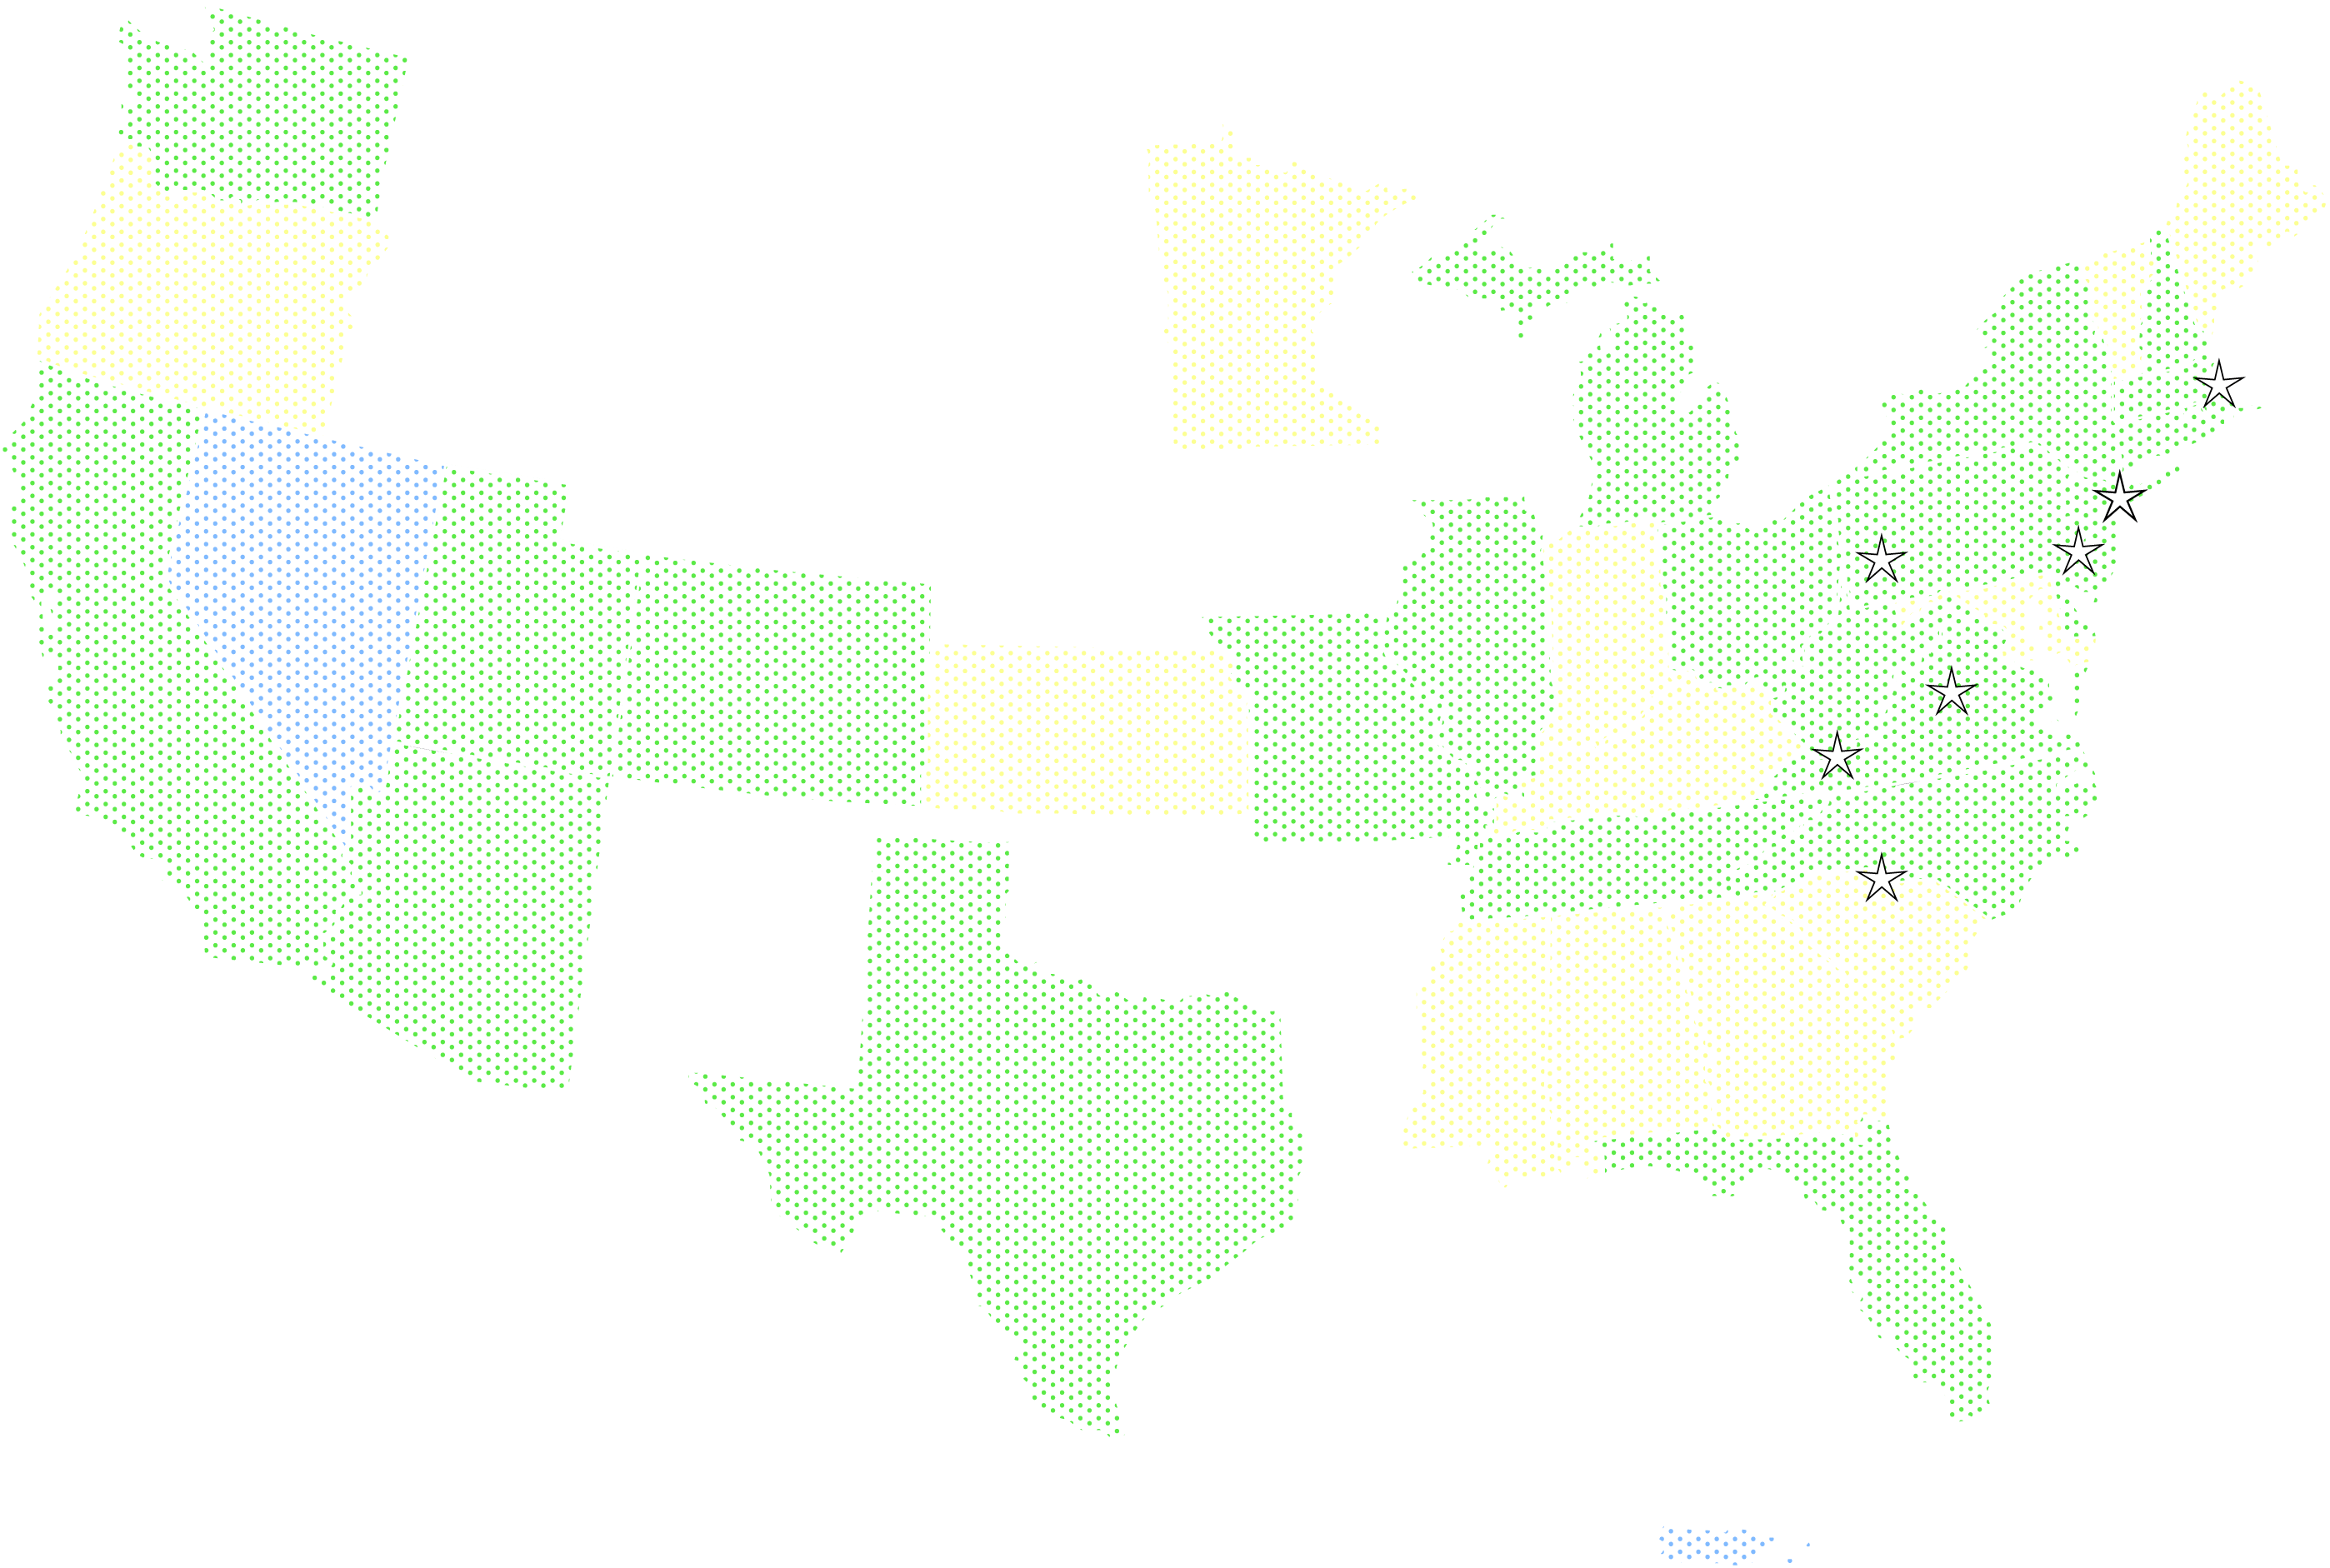 Map of USA with regional service centers marked in Boston, Charlotte, New York, Philadelphia, Pittsburg, Virginia